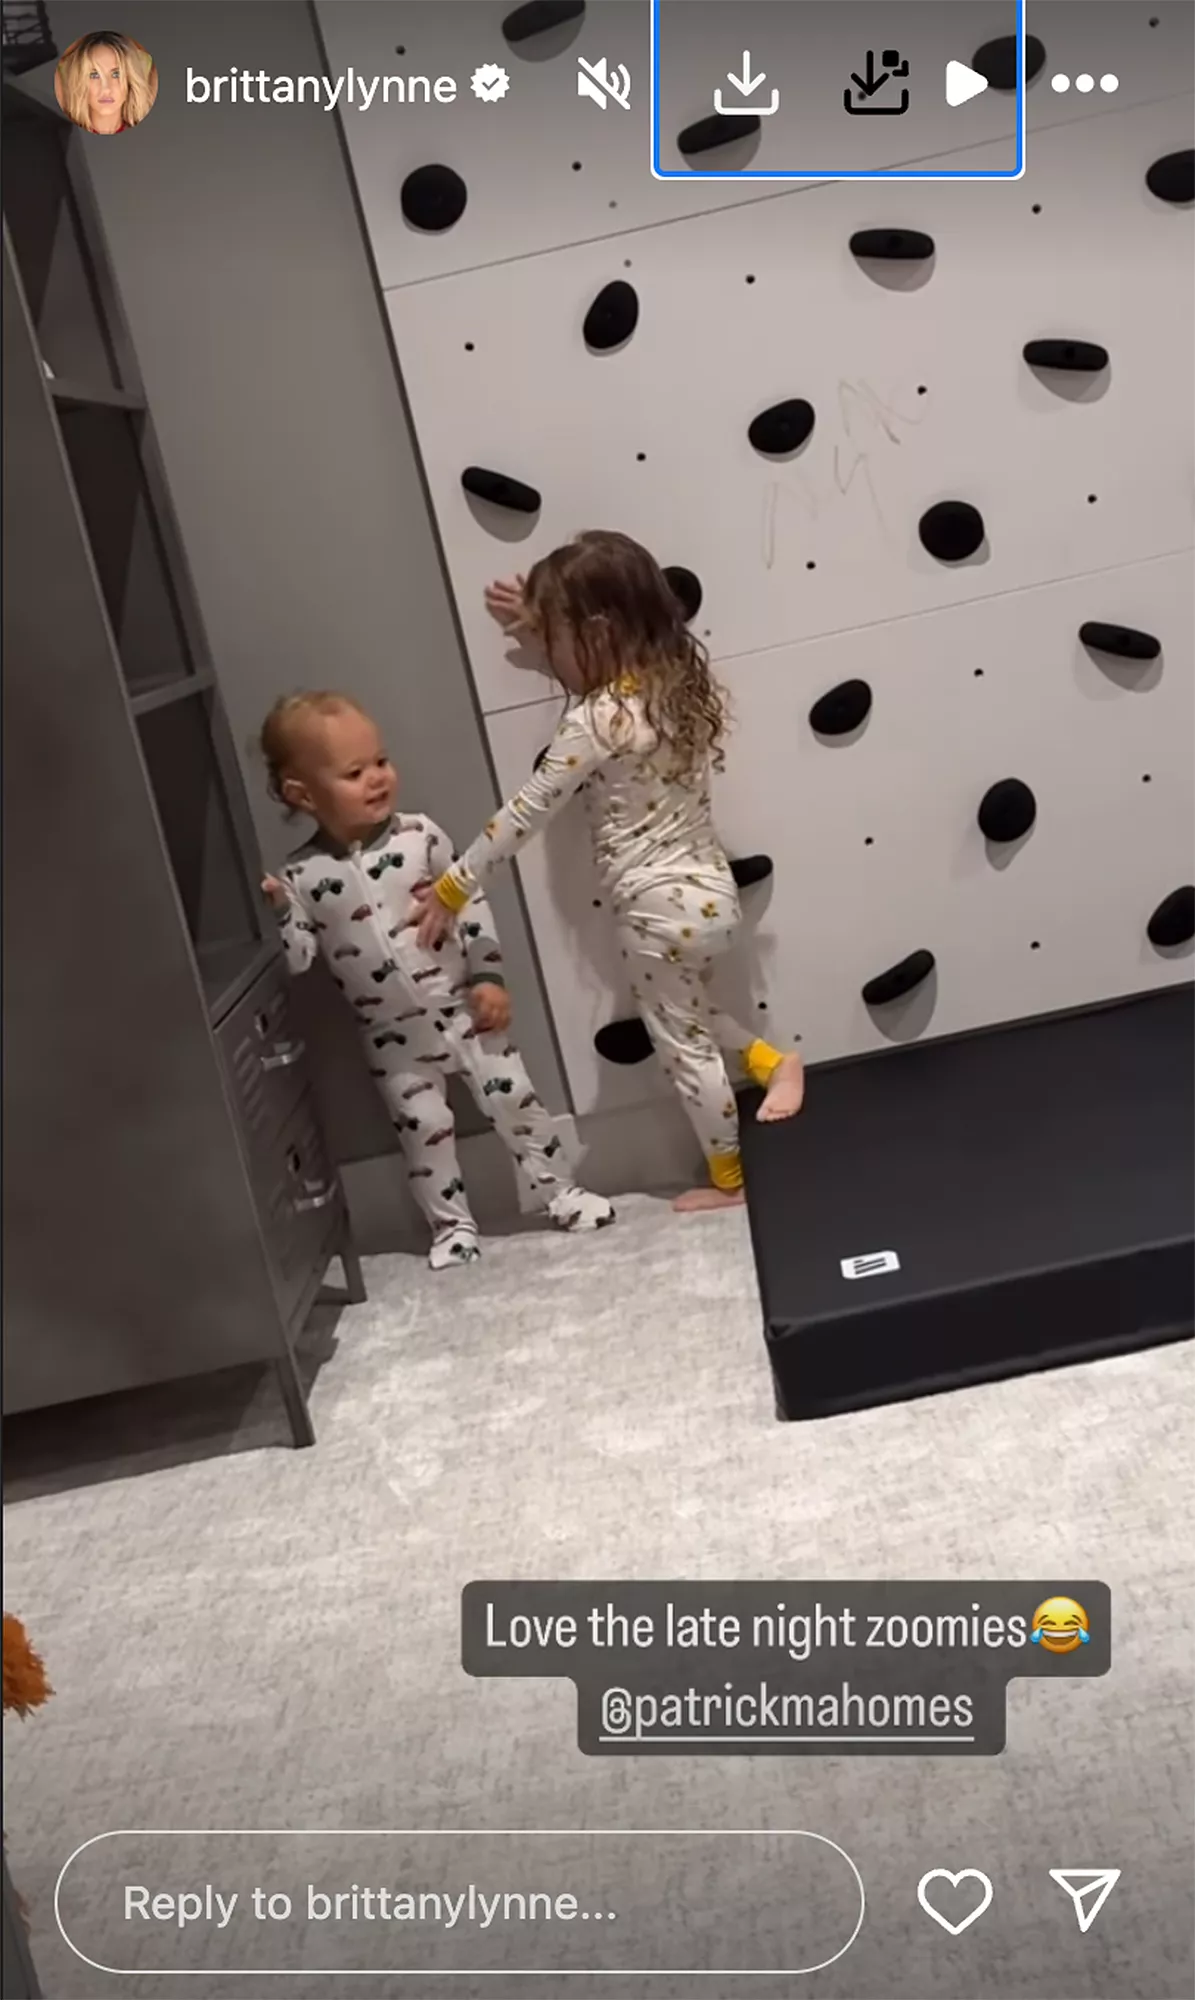 Brittany Mahomes Posts Adorable Videos of Her 2 Kids 'Late Night Zoomies' and Sterling Reciting Prayer